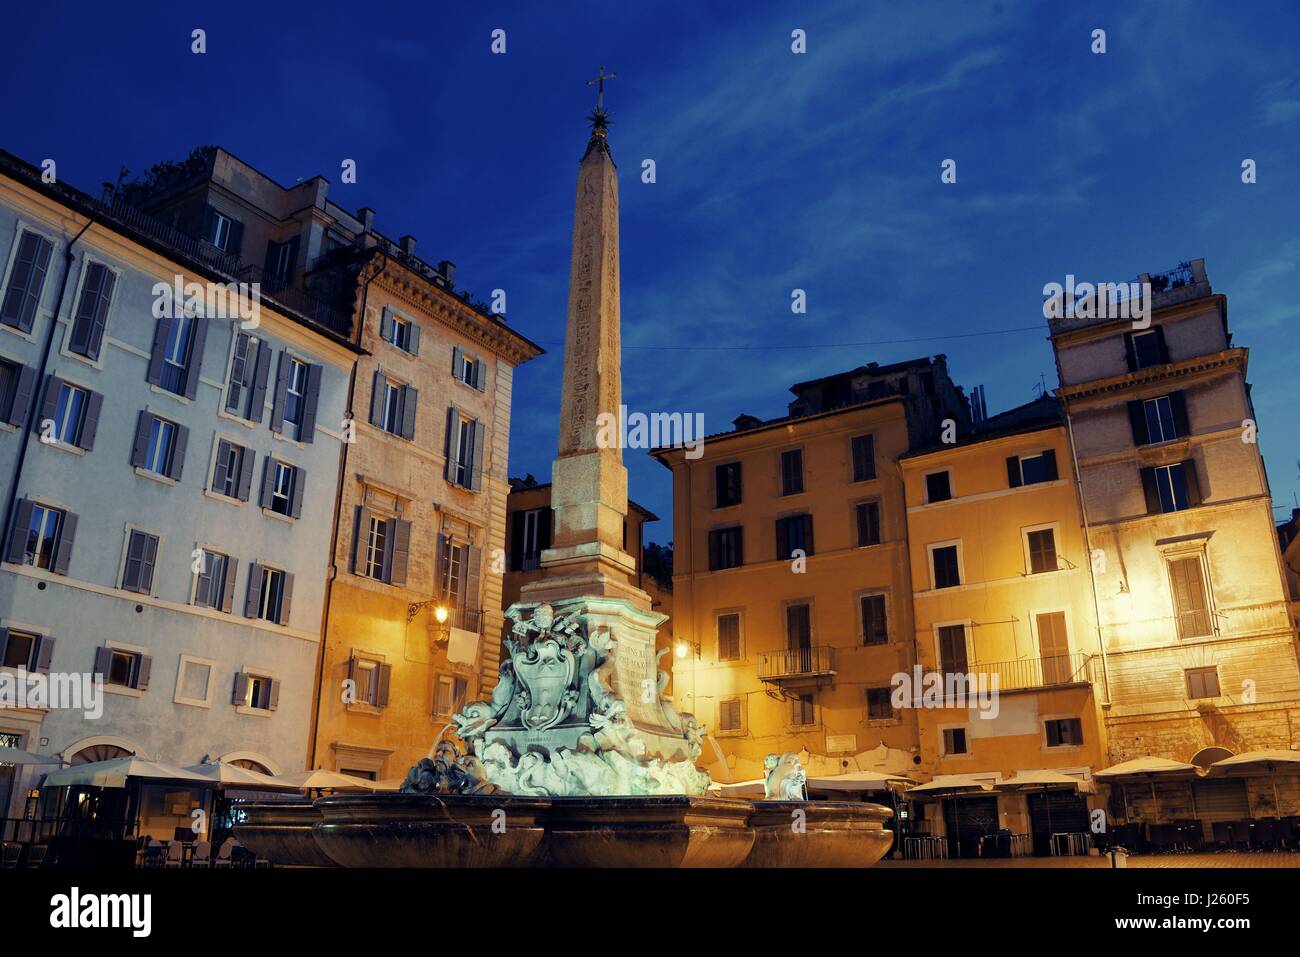 Piazza della Rotonda in front of Pantheon at night in Rome, Italy. Stock Photo